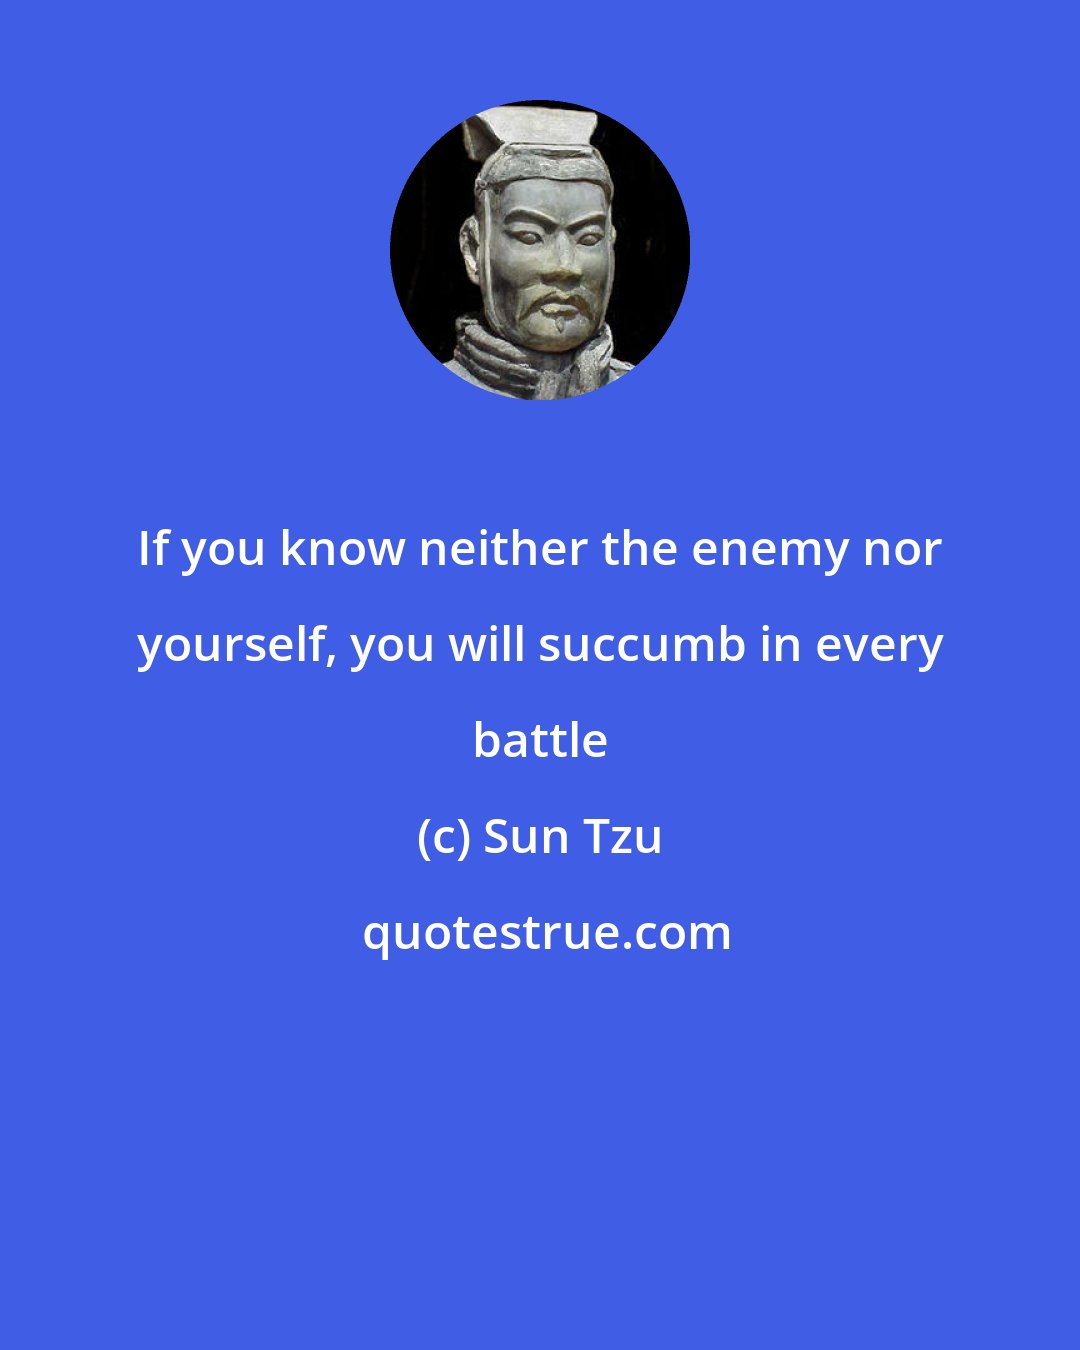 Sun Tzu: If you know neither the enemy nor yourself, you will succumb in every battle